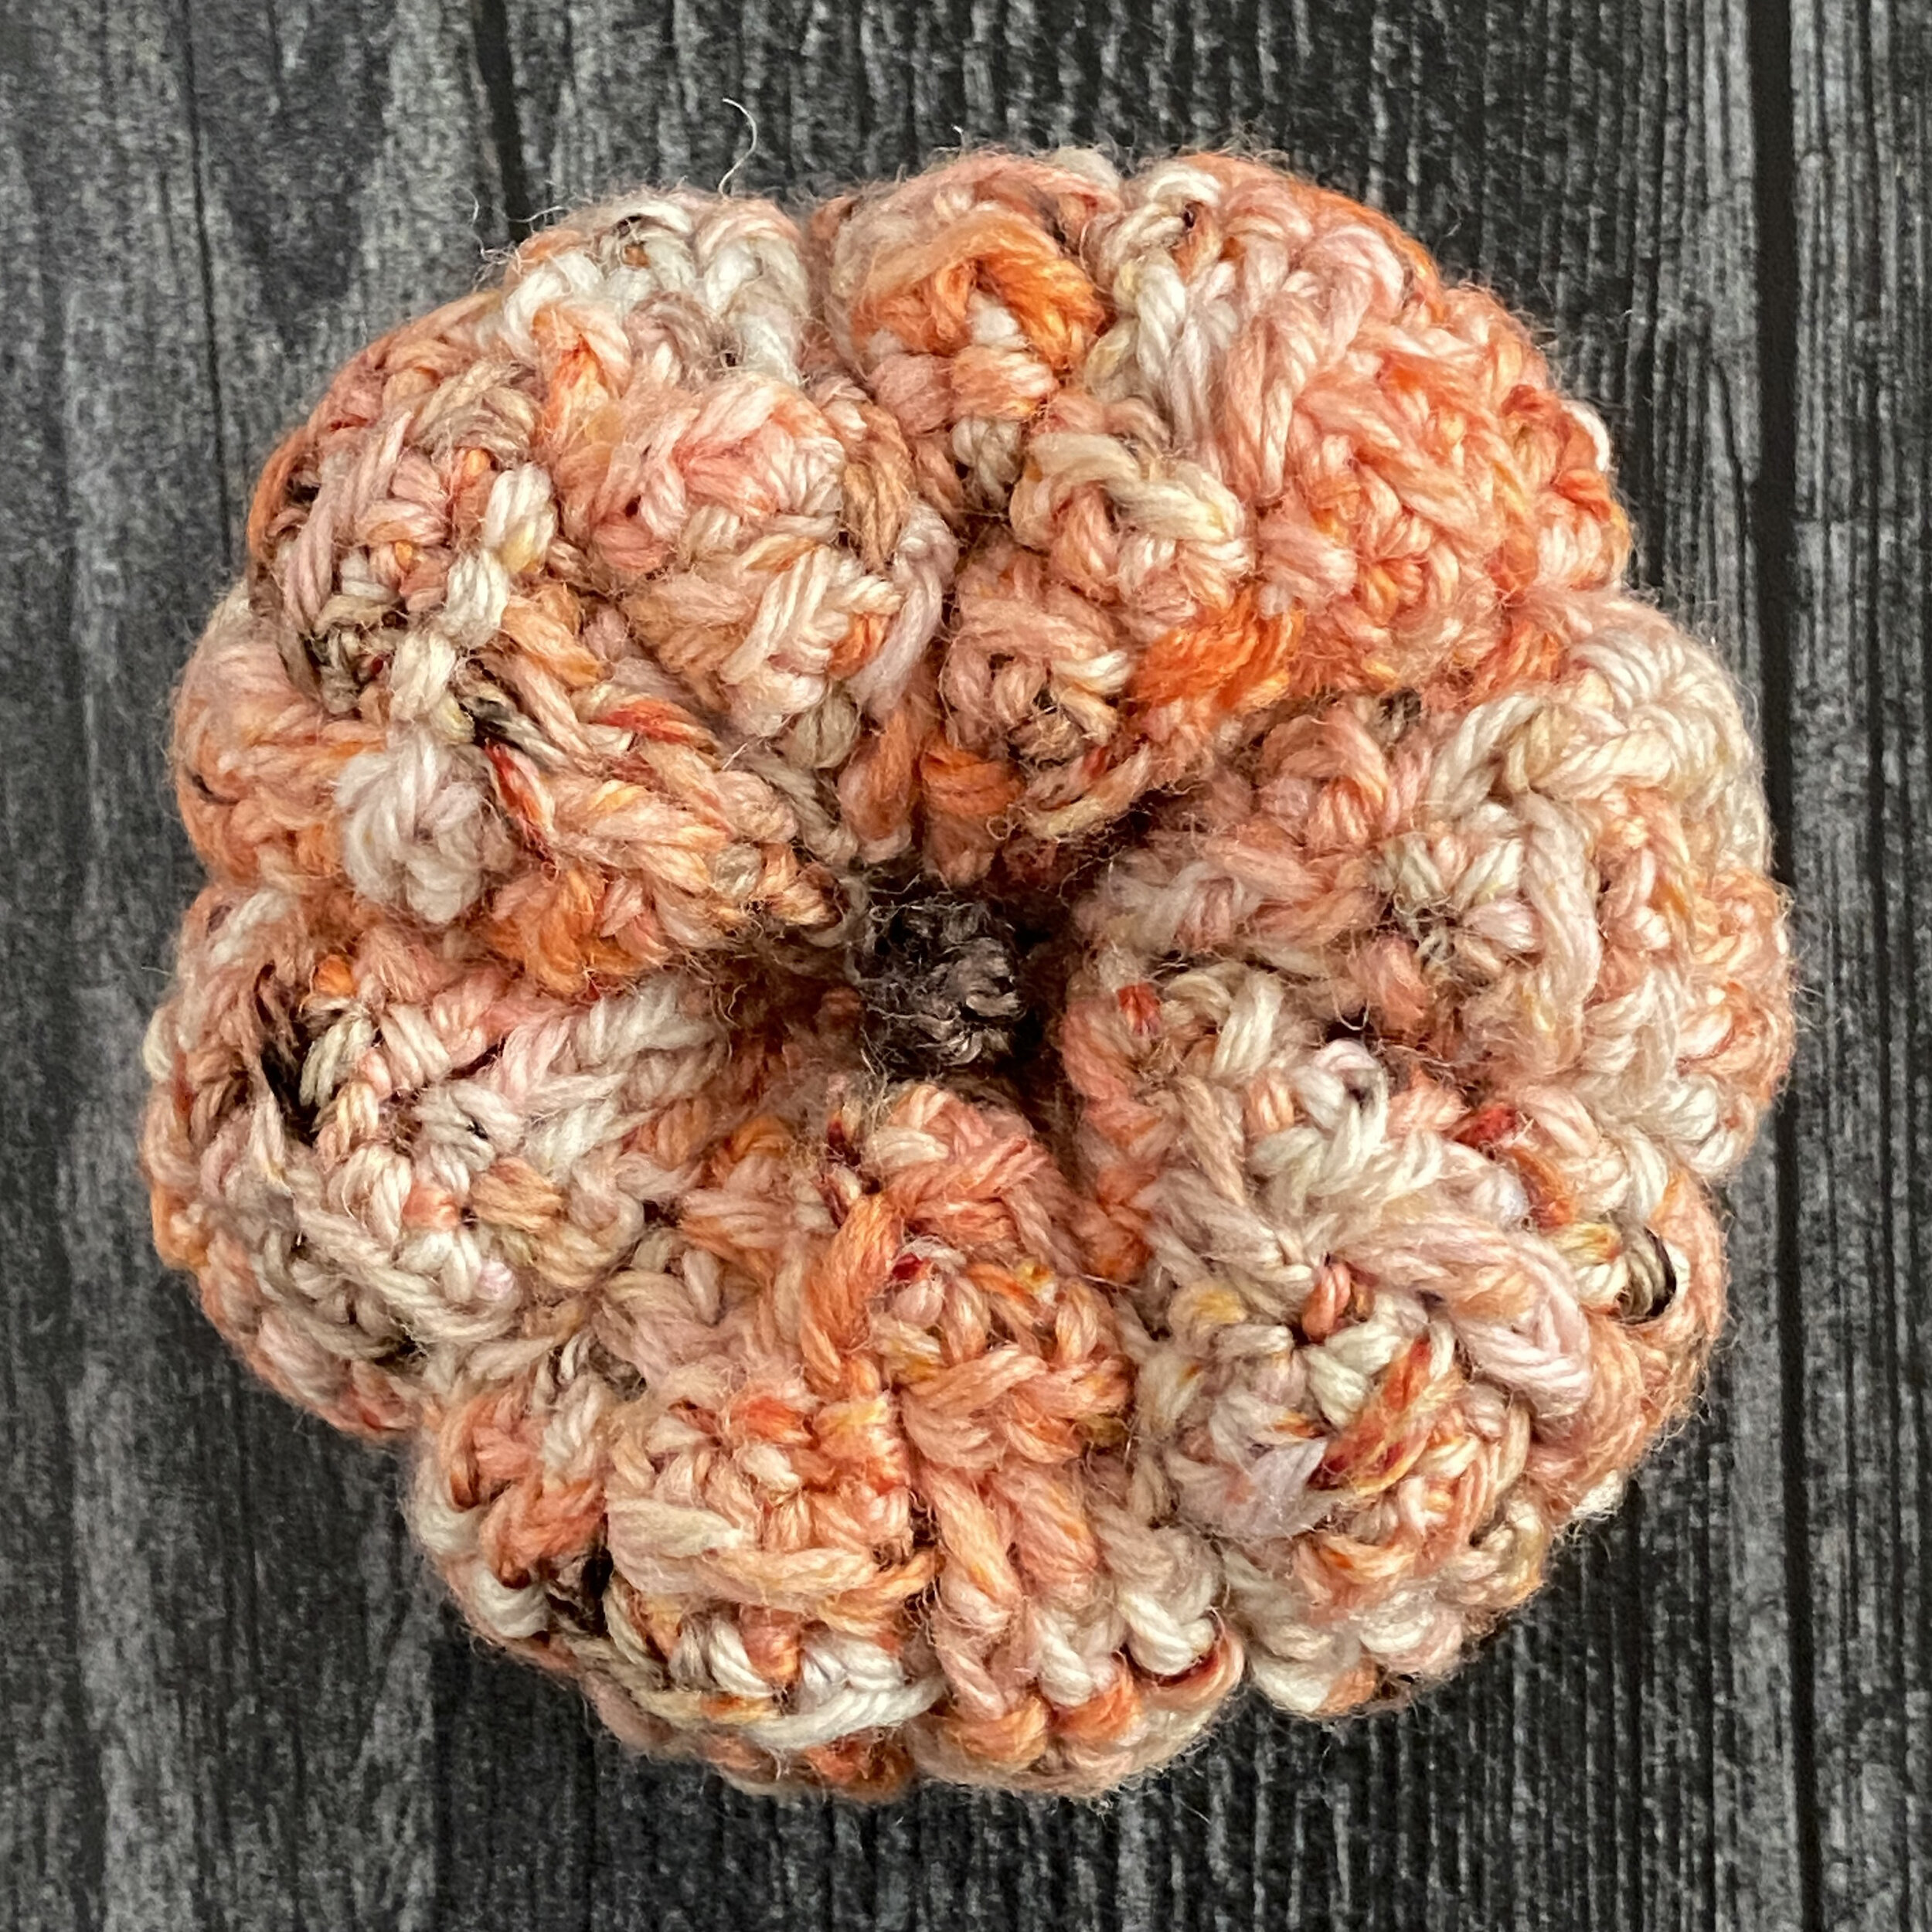 Top-down view of the crocheted Stone Path Pumpkin on top of gray wood.